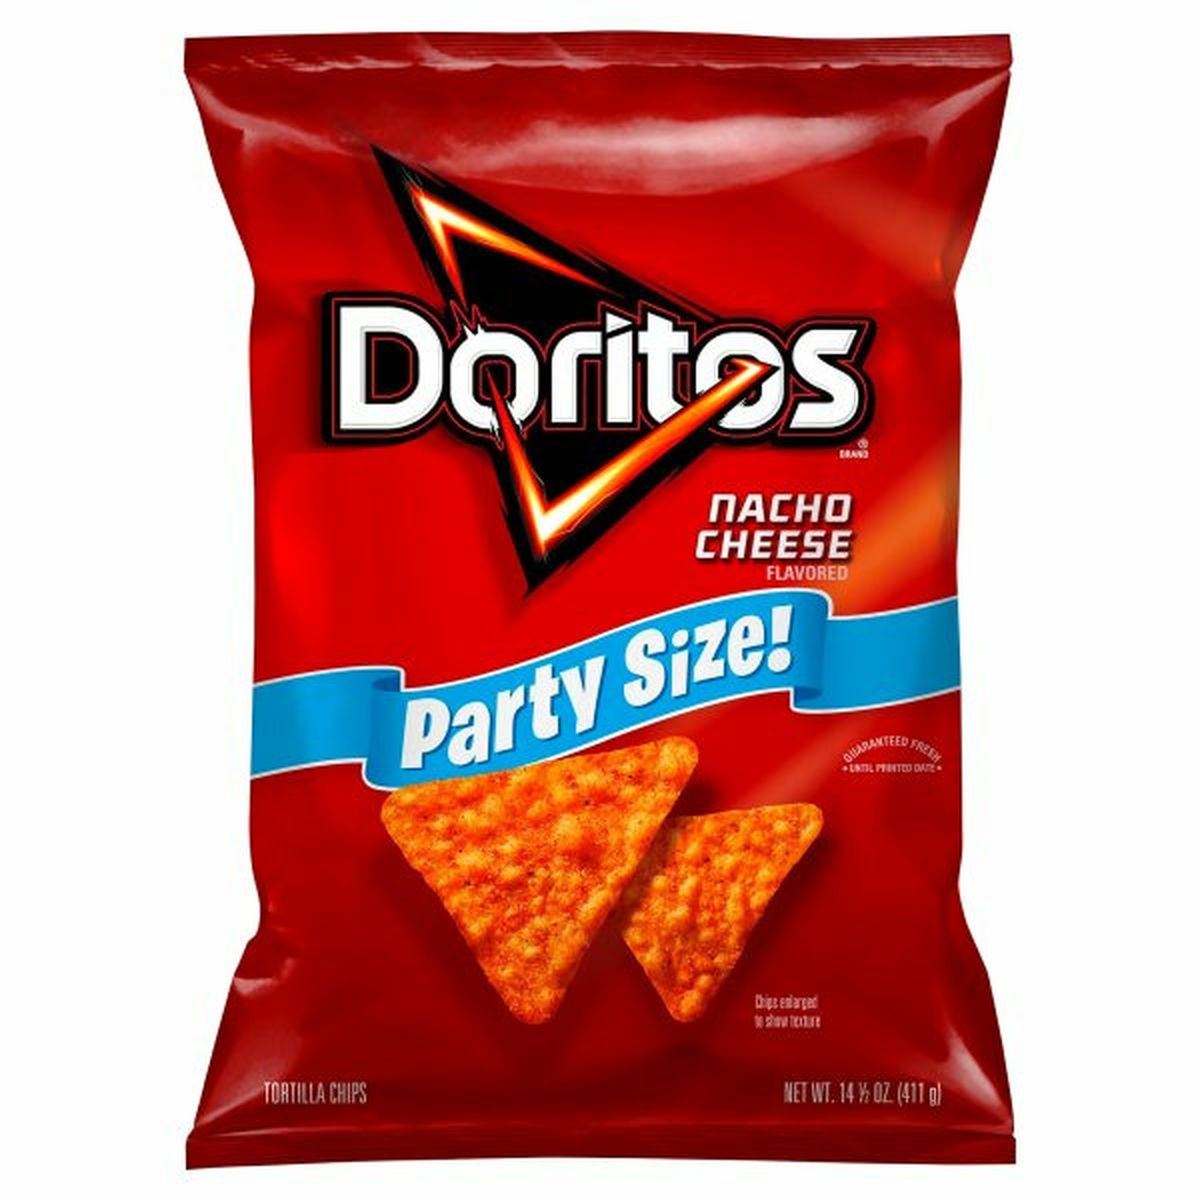 Calories in Doritos Tortilla Chips, Nacho Cheese Flavored, Party Size!